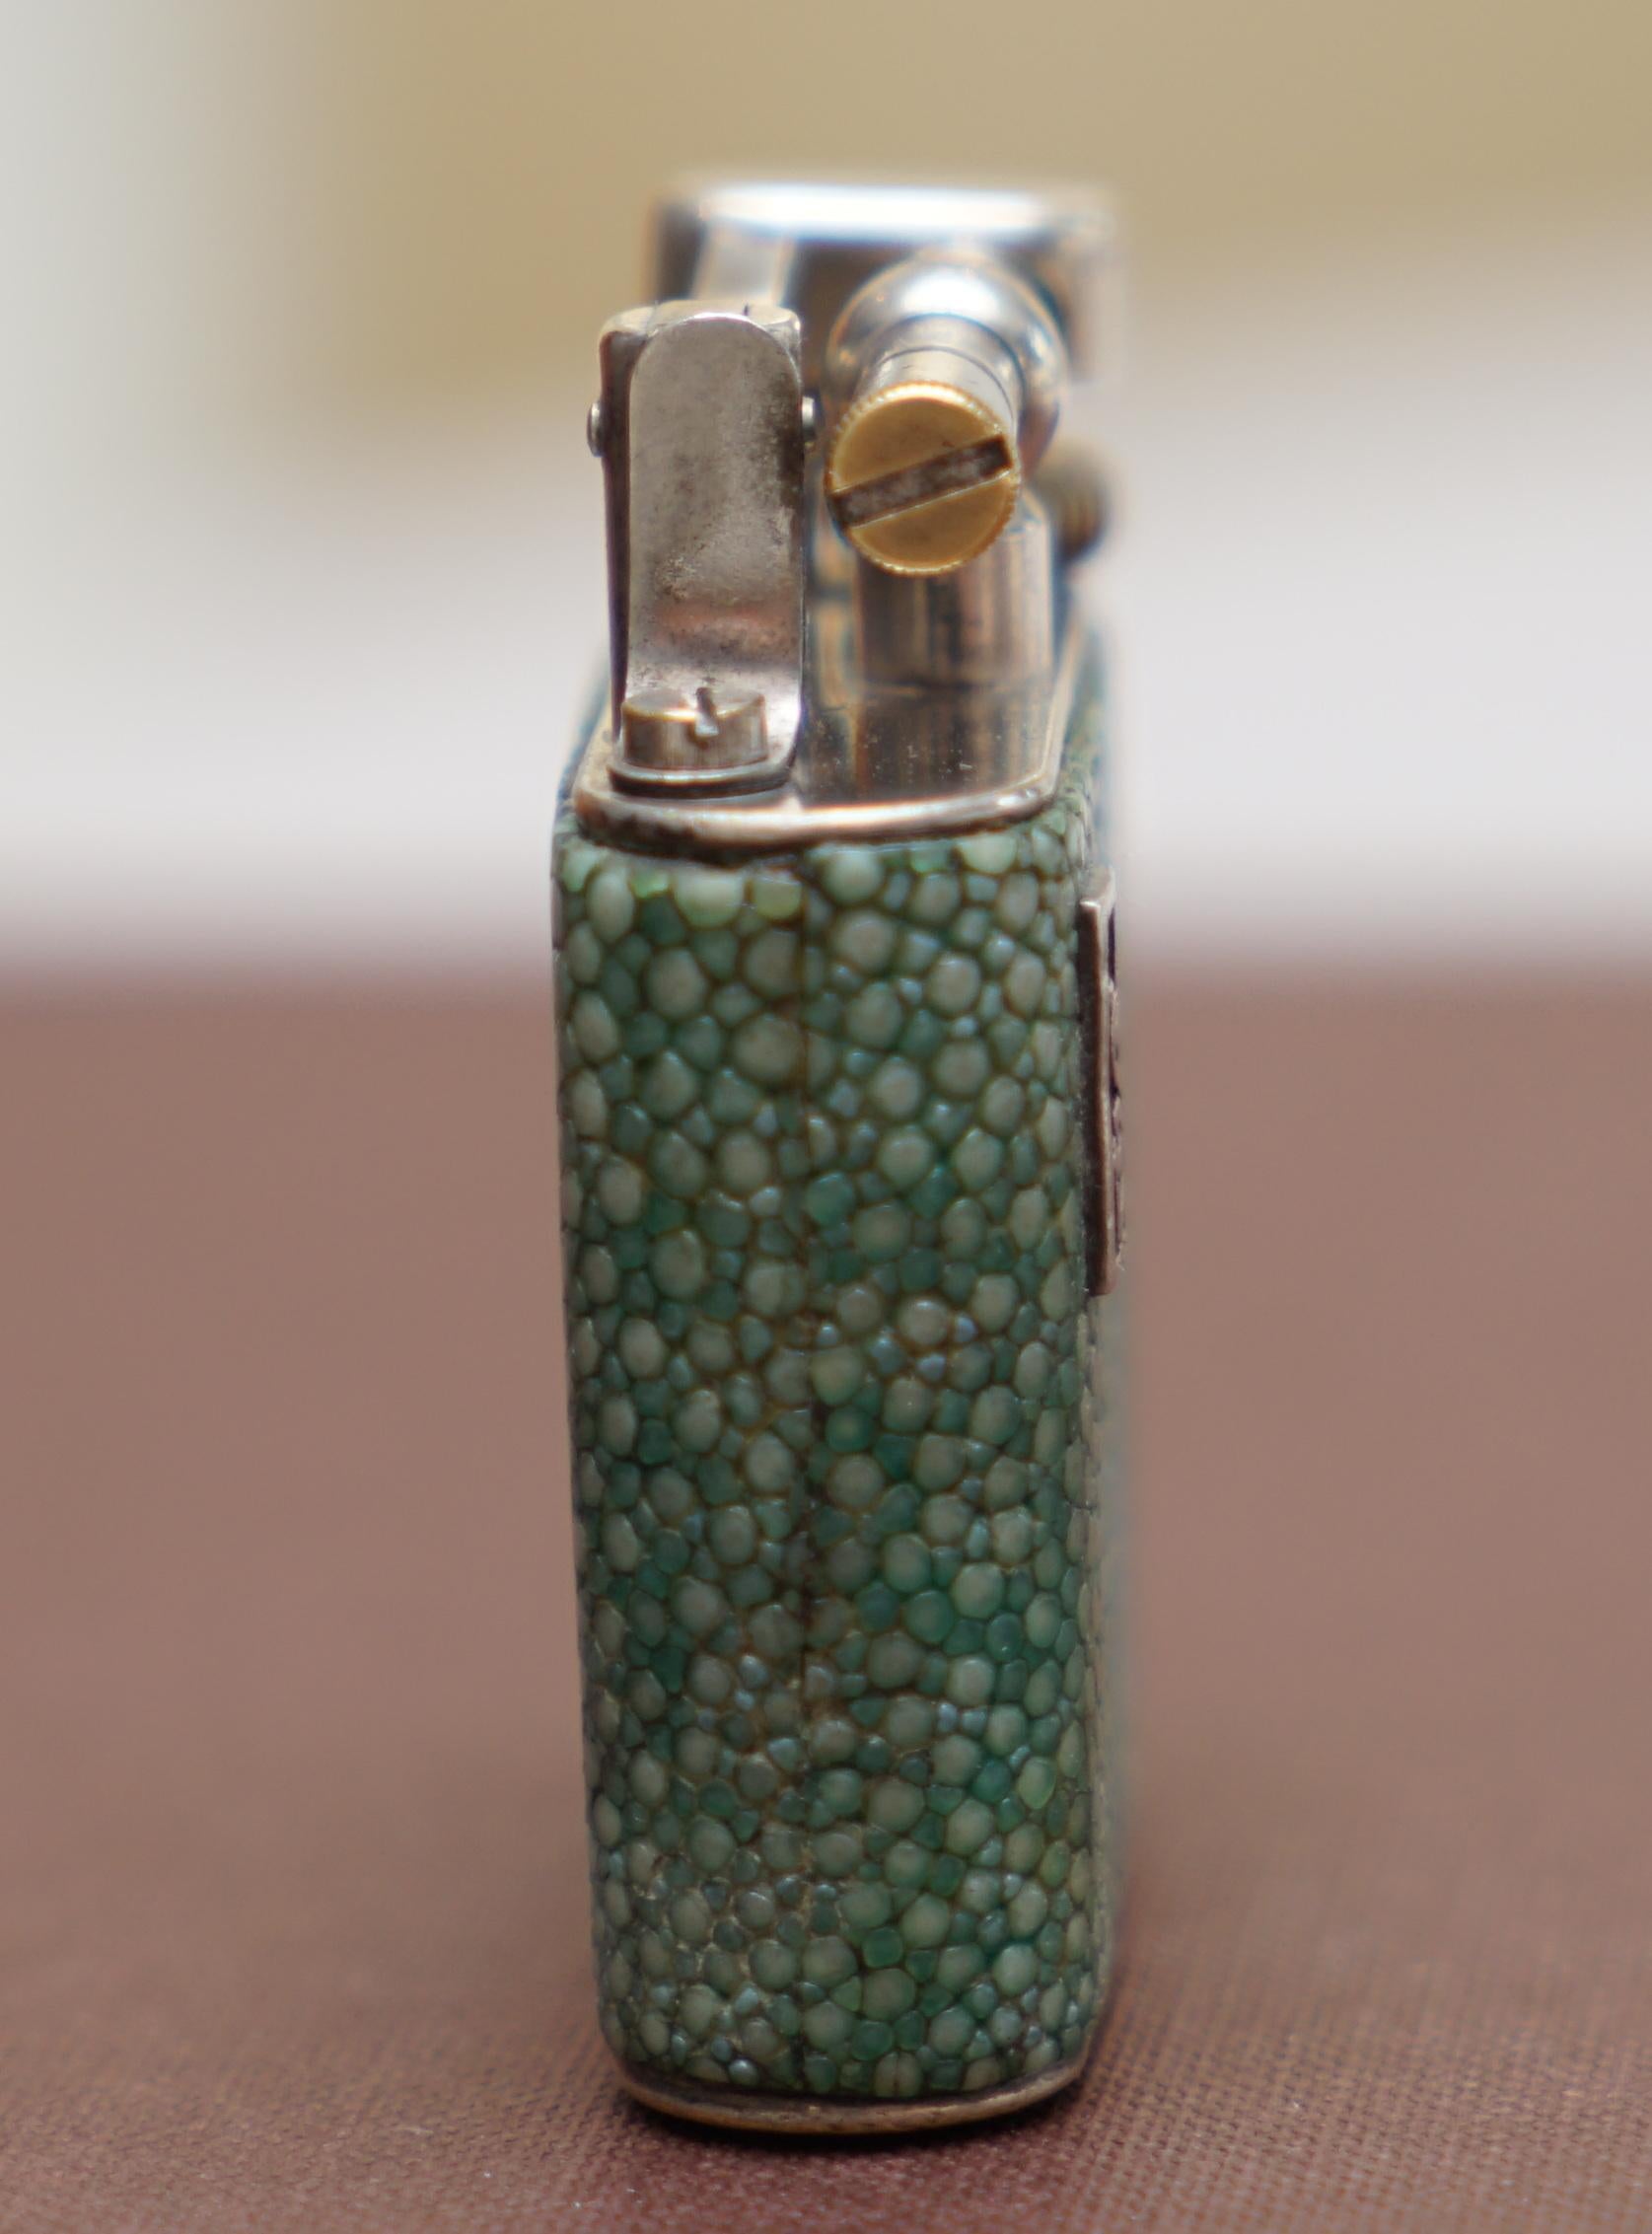 Hand-Crafted Rare 1930s Dunhill Shagreen Lighter Pat No 390107 Made in England Art Deco Era